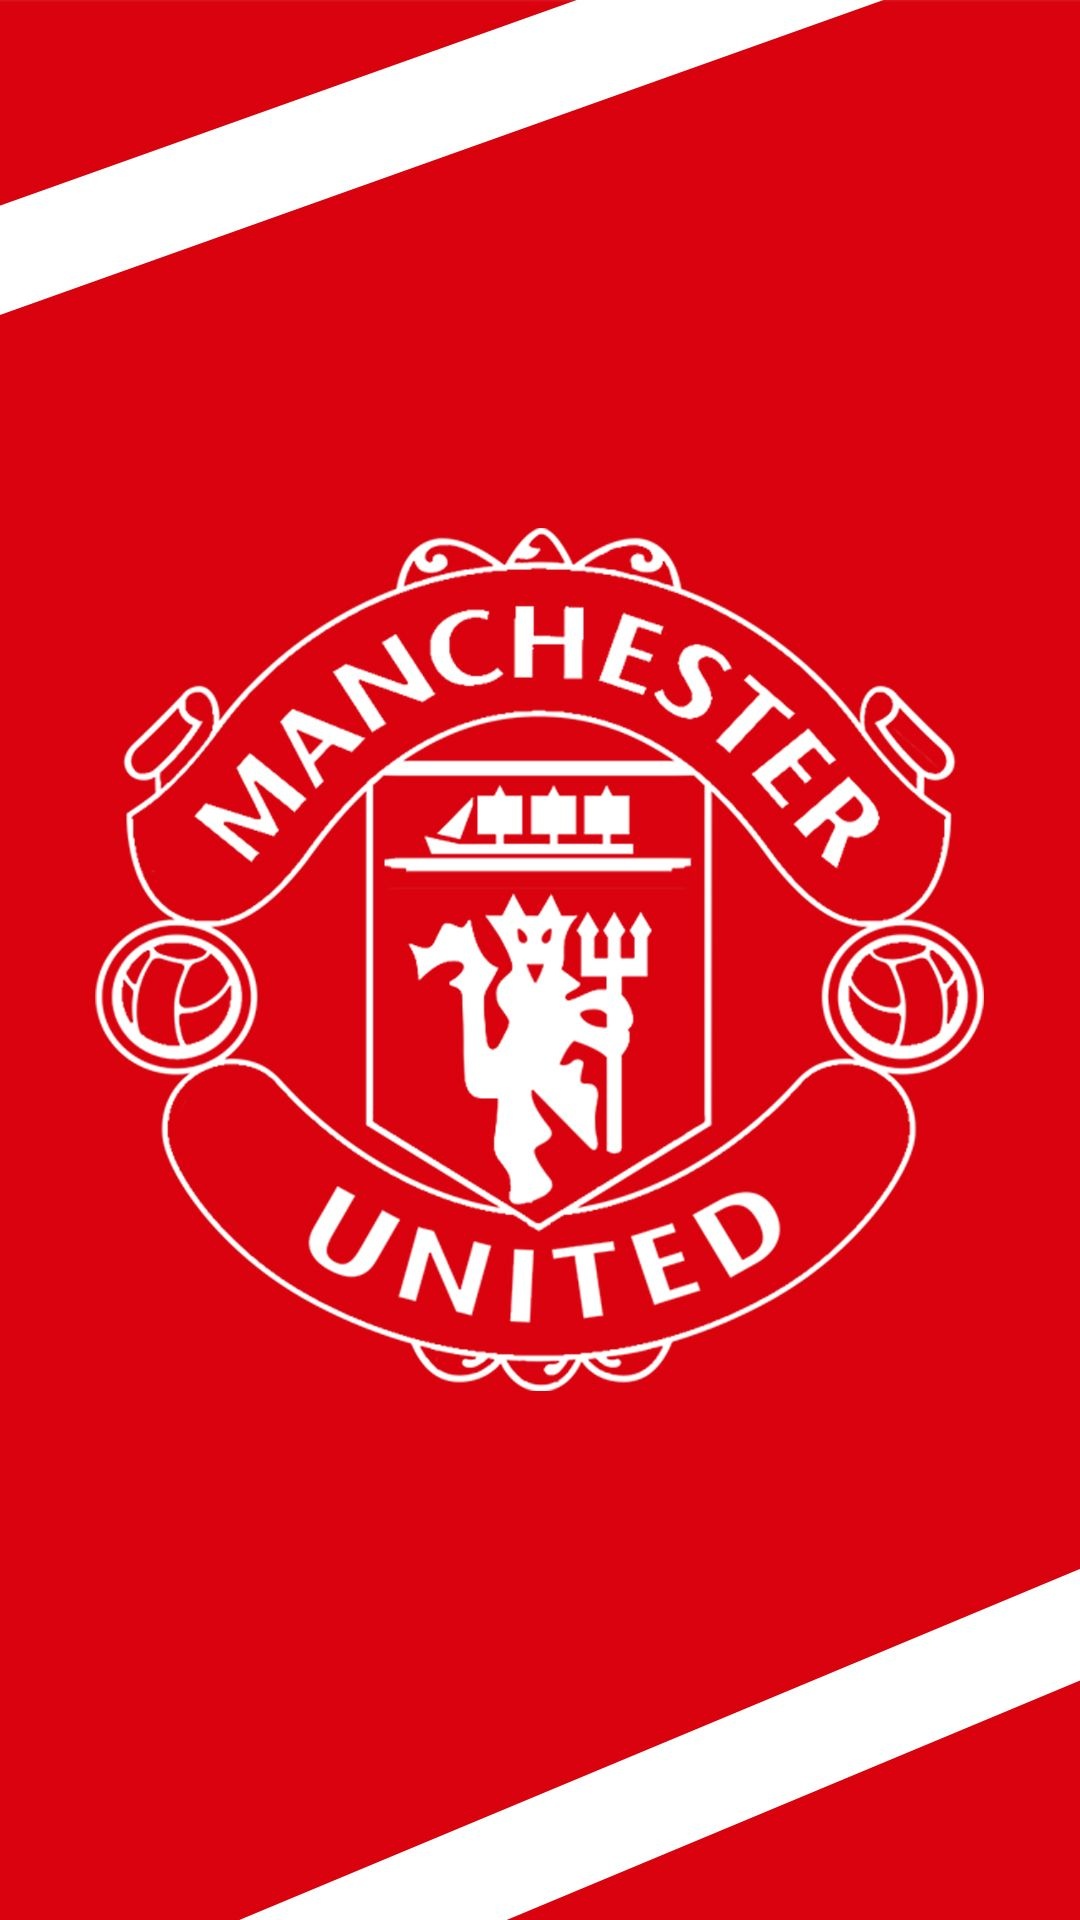 Manchester United, 2021 phone wallpapers, Modern design, Stylish display, 1080x1920 Full HD Phone